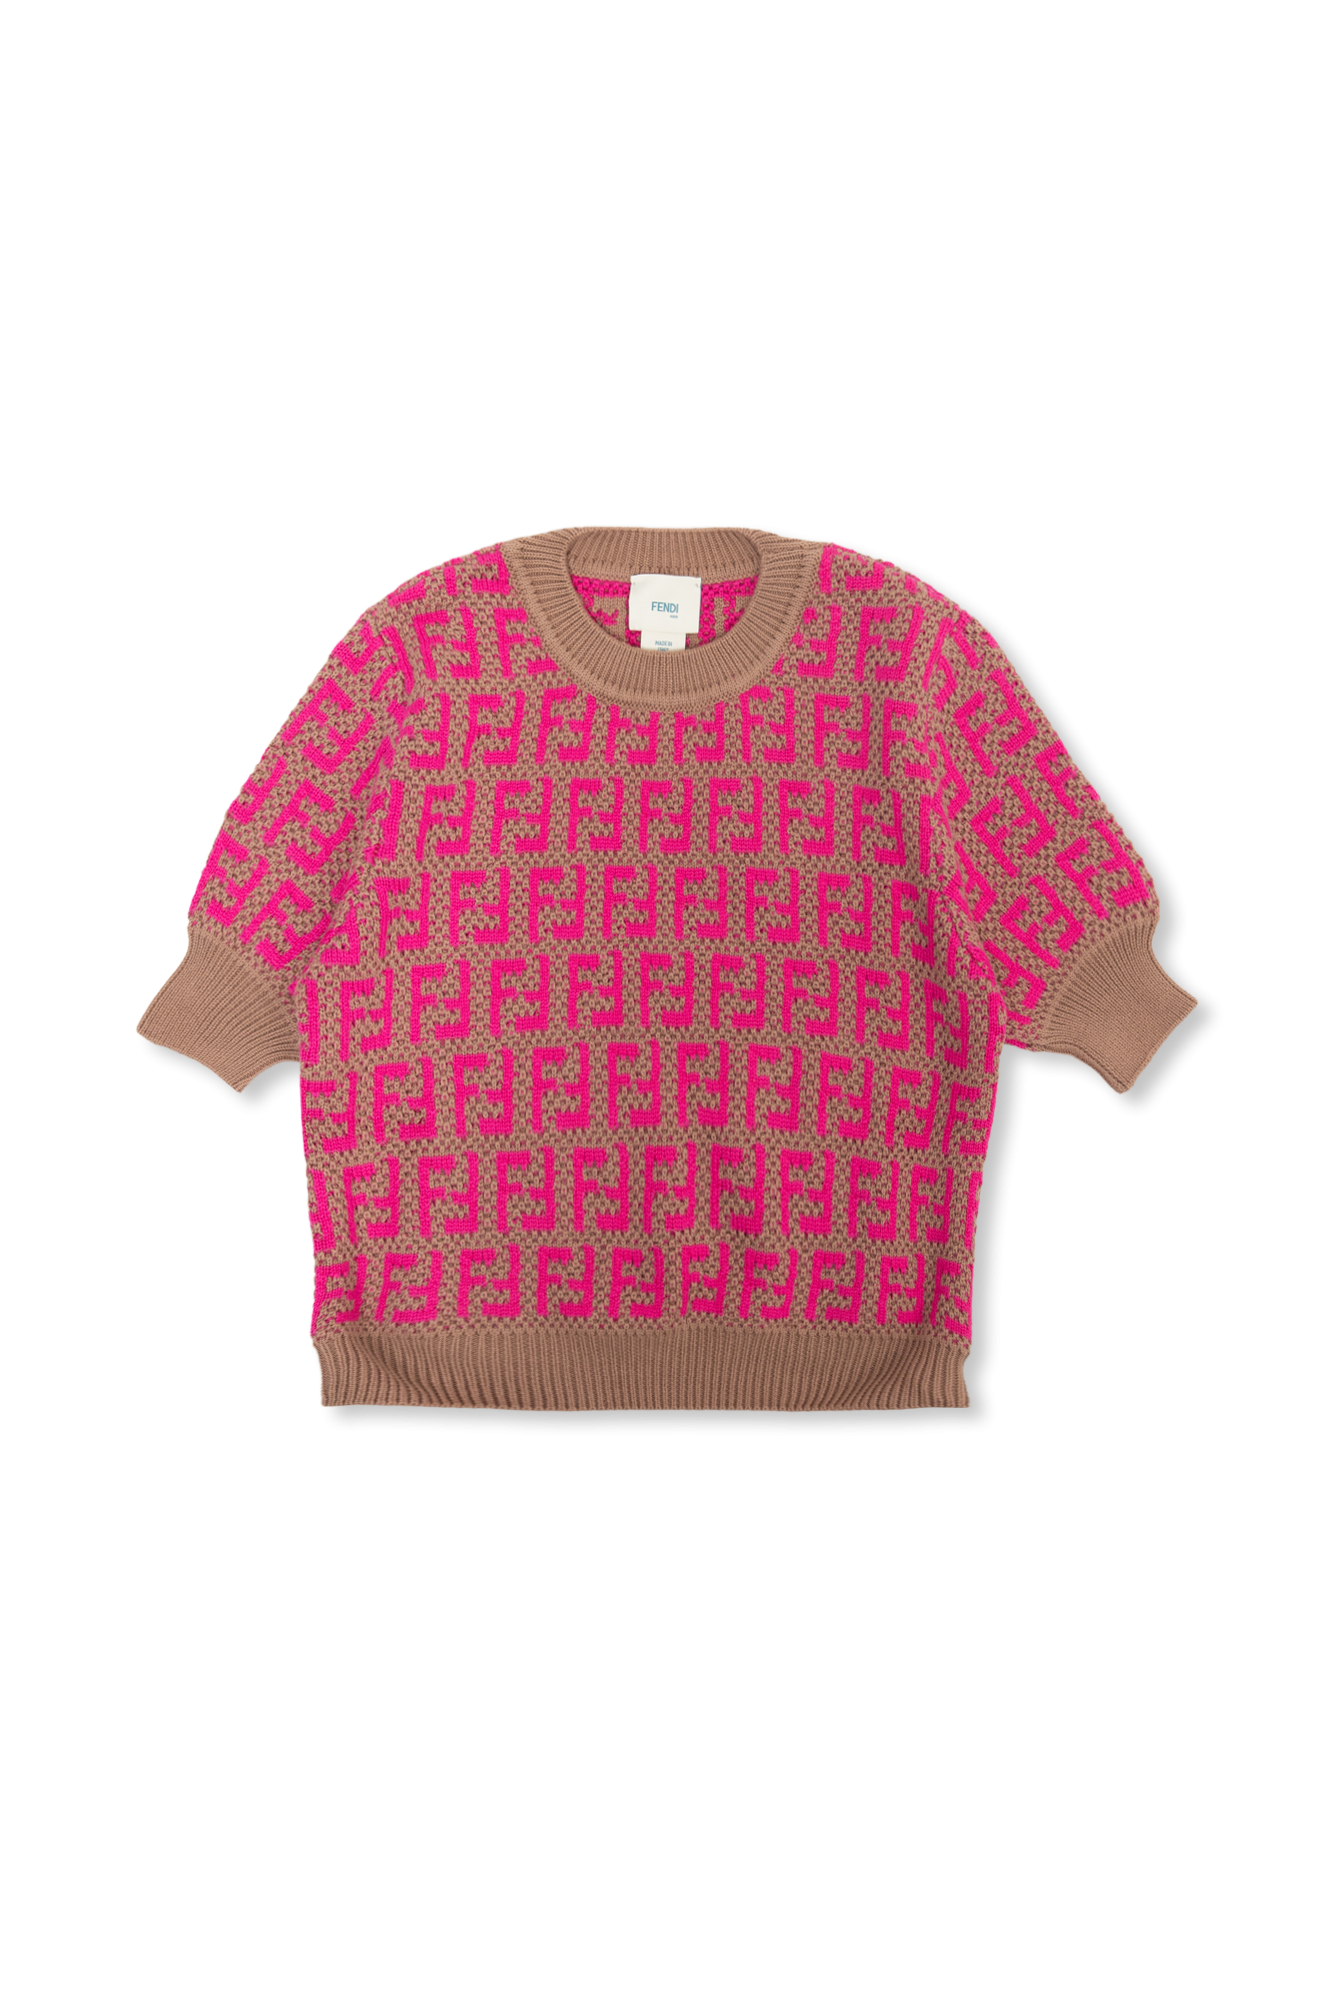 Louis Vuitton Girls clothes 4-14 years